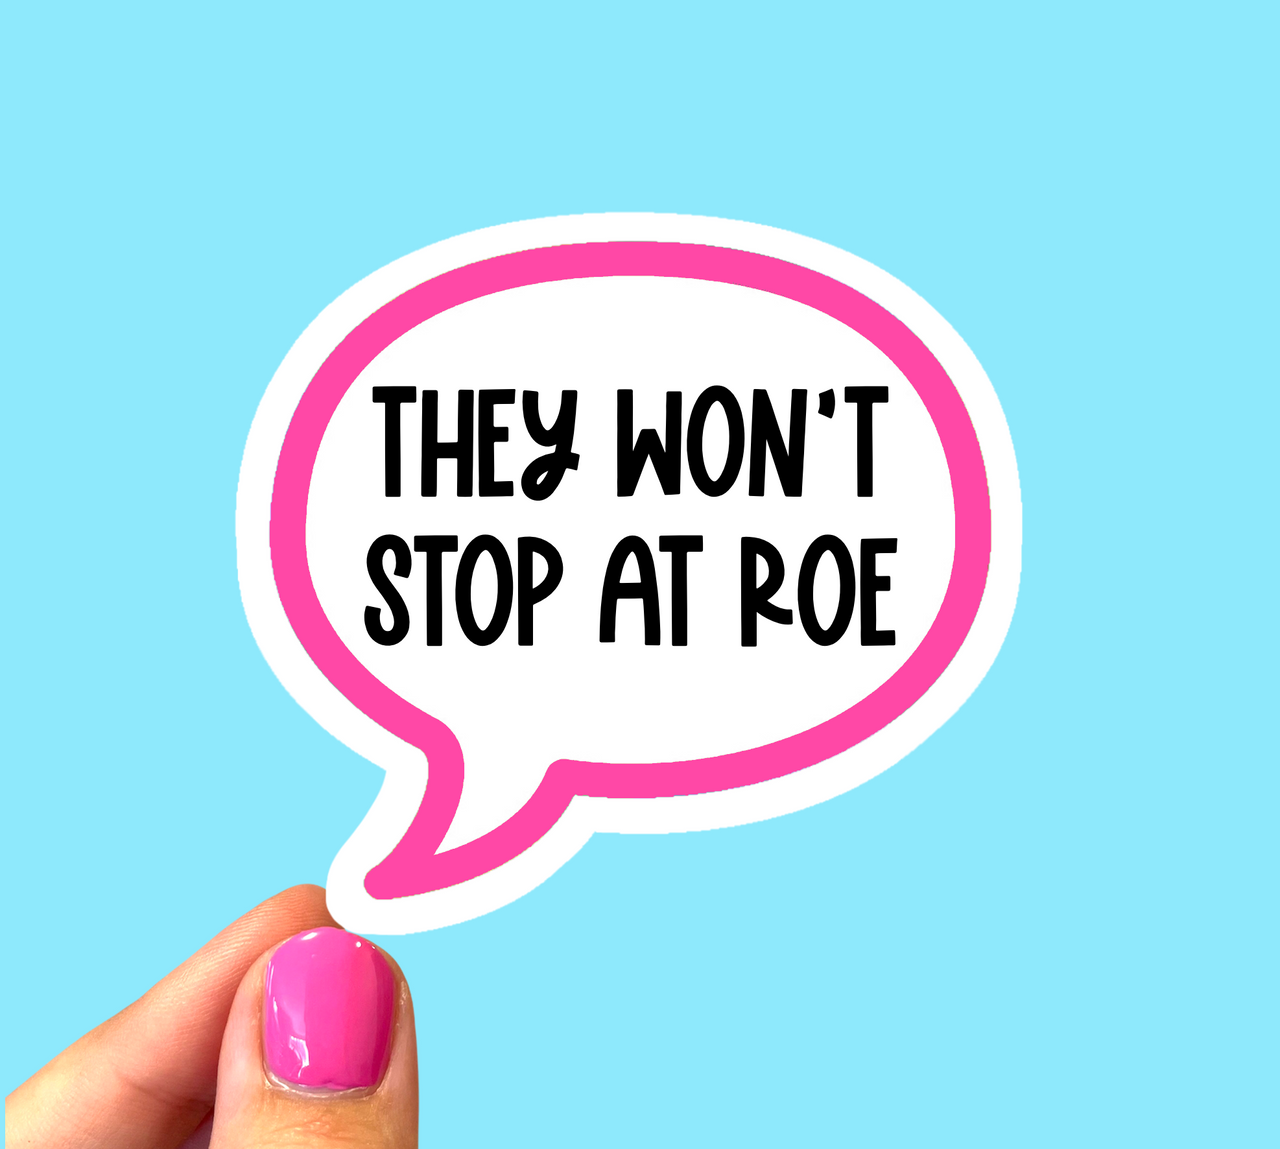 They won’t stop at Roe